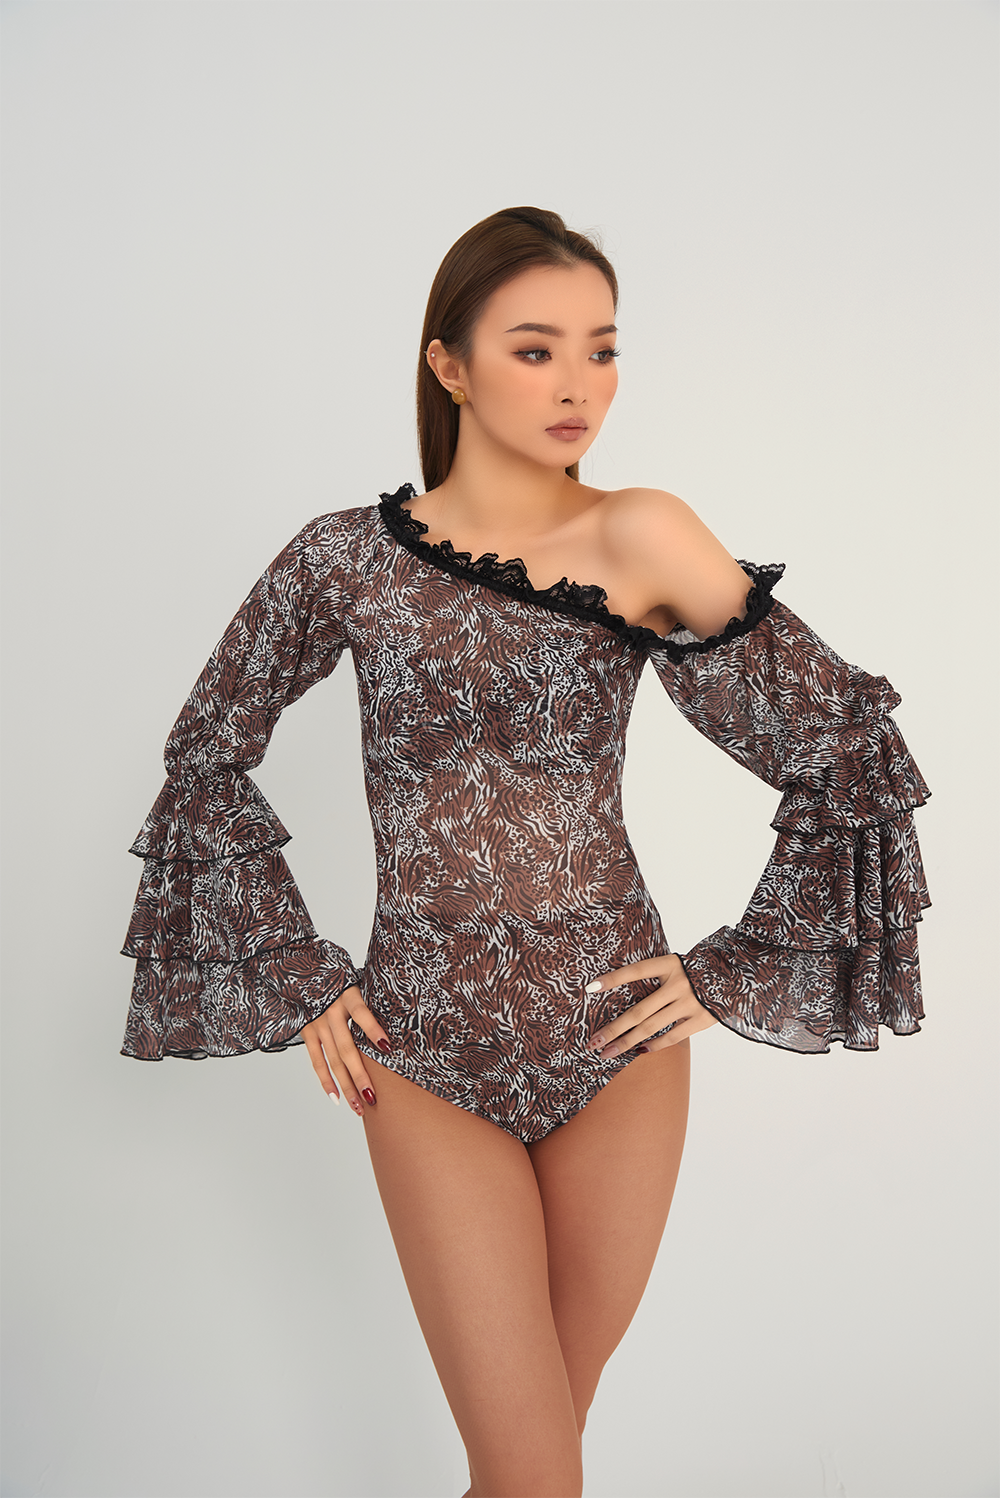 The DANCE QUEEN 677-2 leotard is perfect for any dance enthusiast. The off-shoulder design and leopard print add a touch of glamour, while the ruffle and long sleeve provide comfort and style. Dance confidently and stand out with this unique leotard.